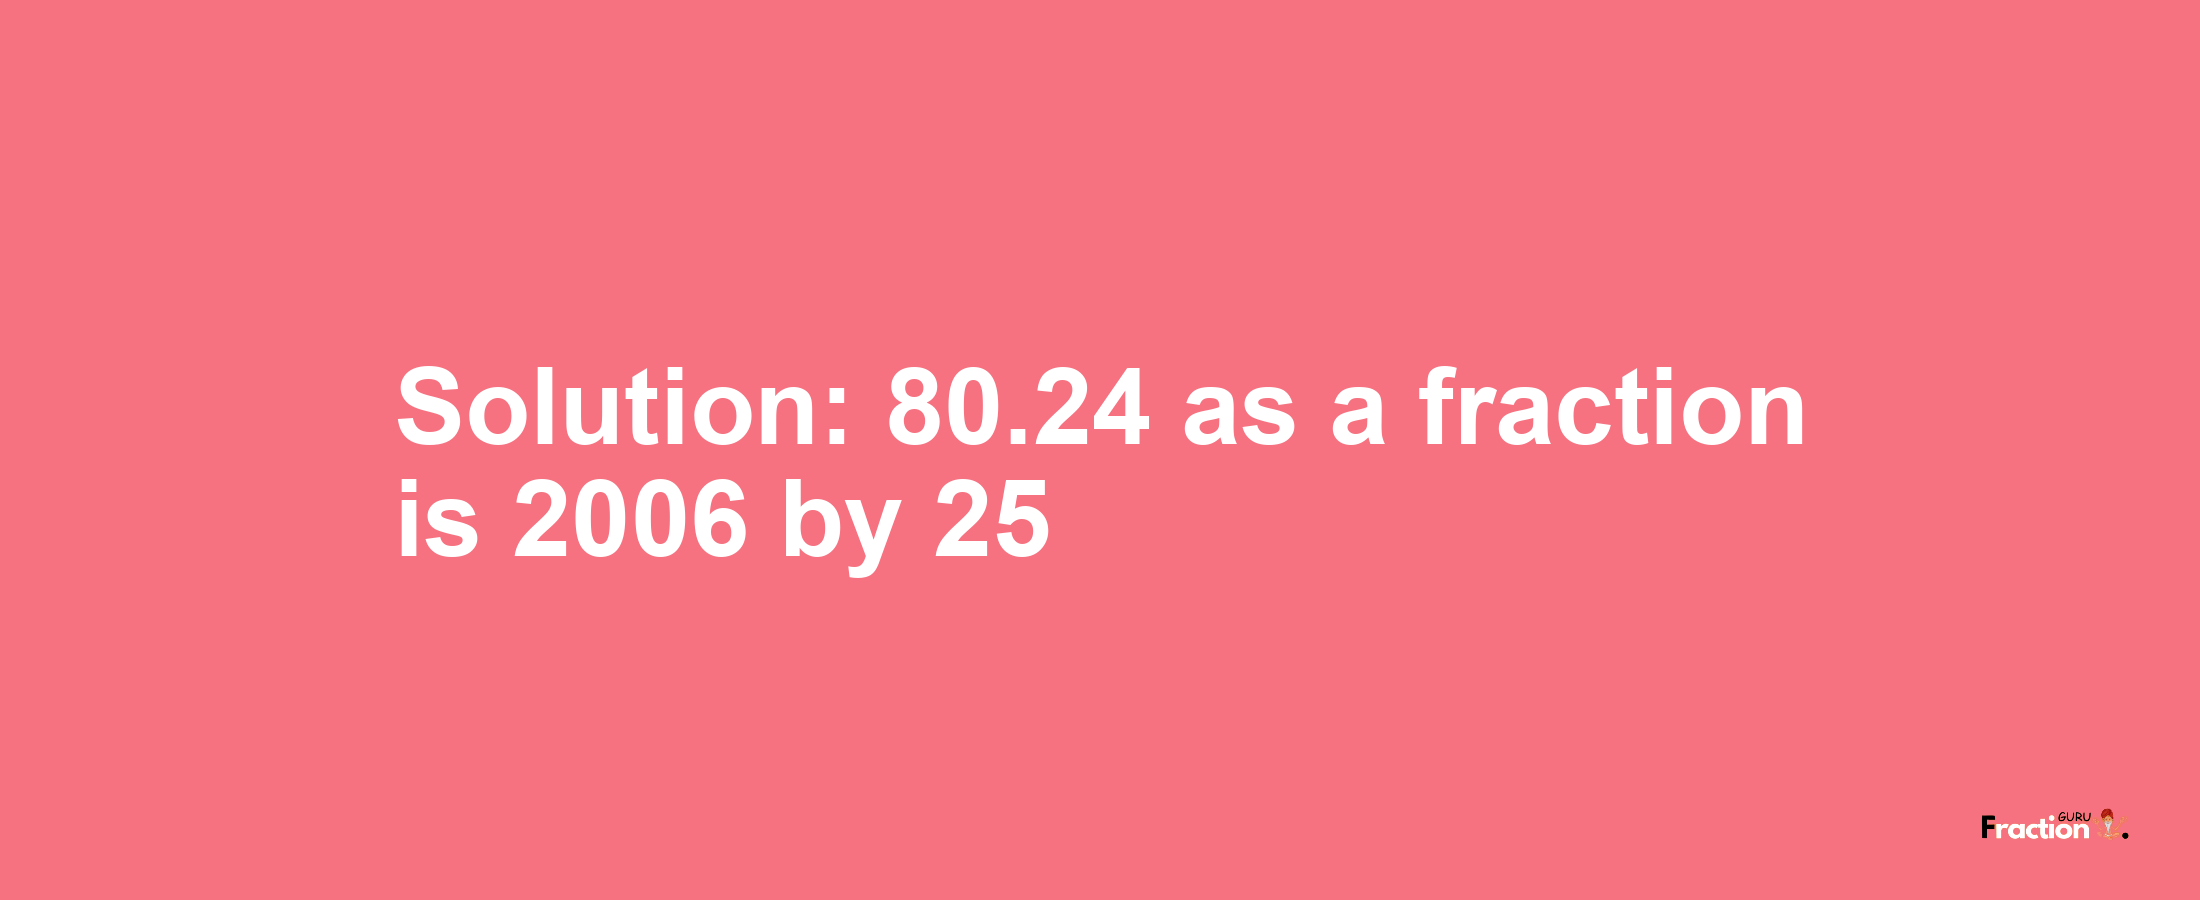 Solution:80.24 as a fraction is 2006/25